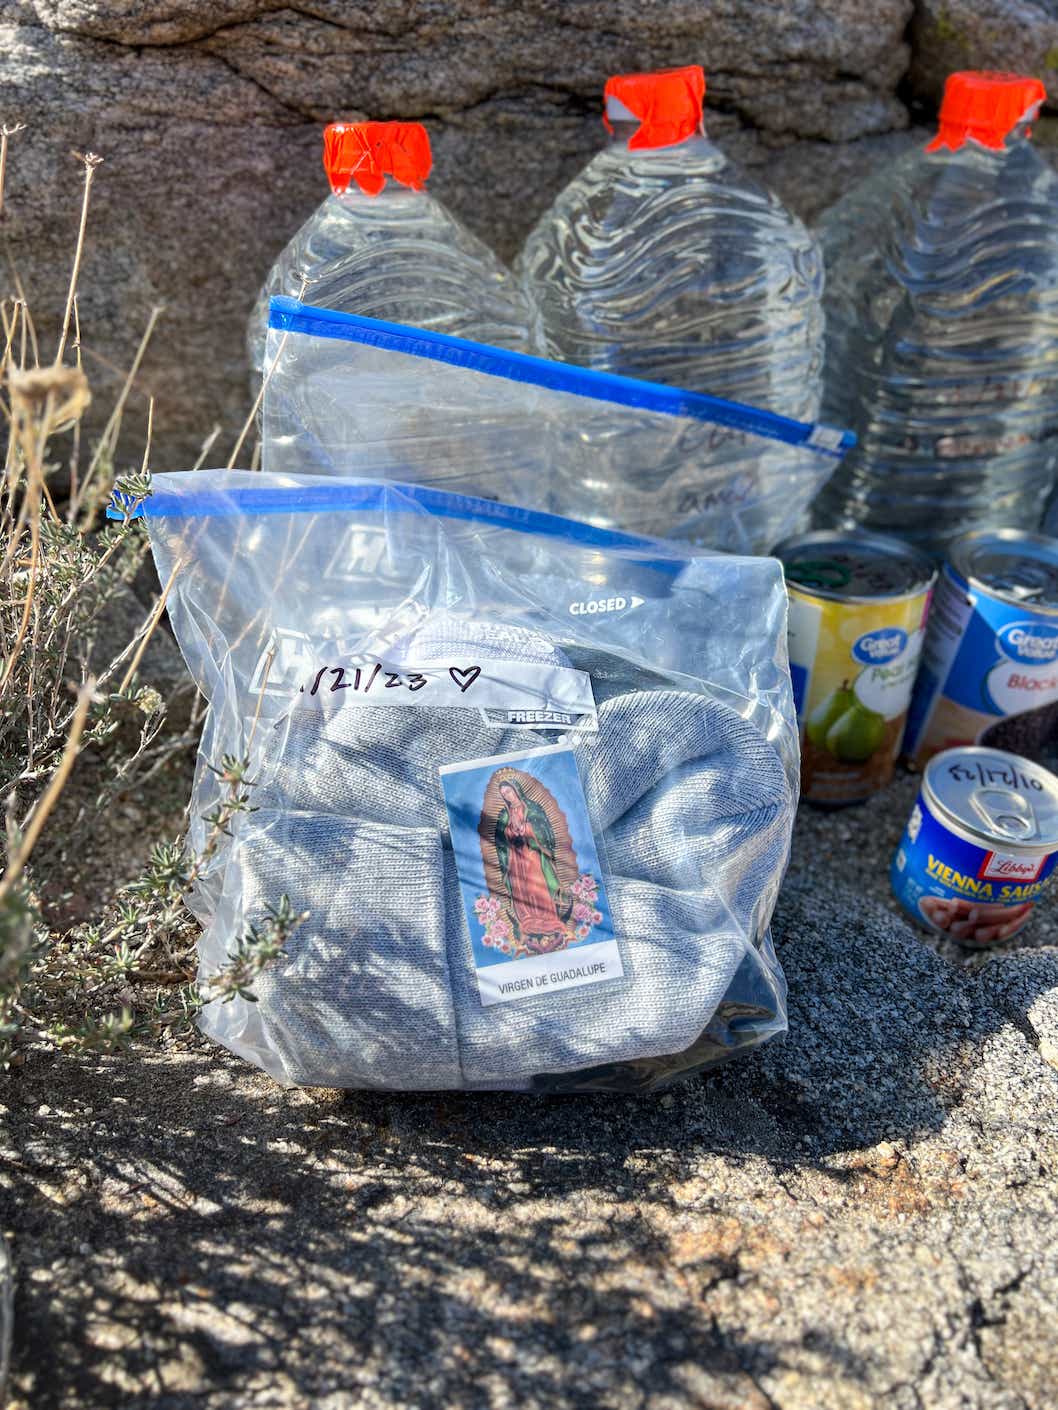 A pack of supplies left in the desert.